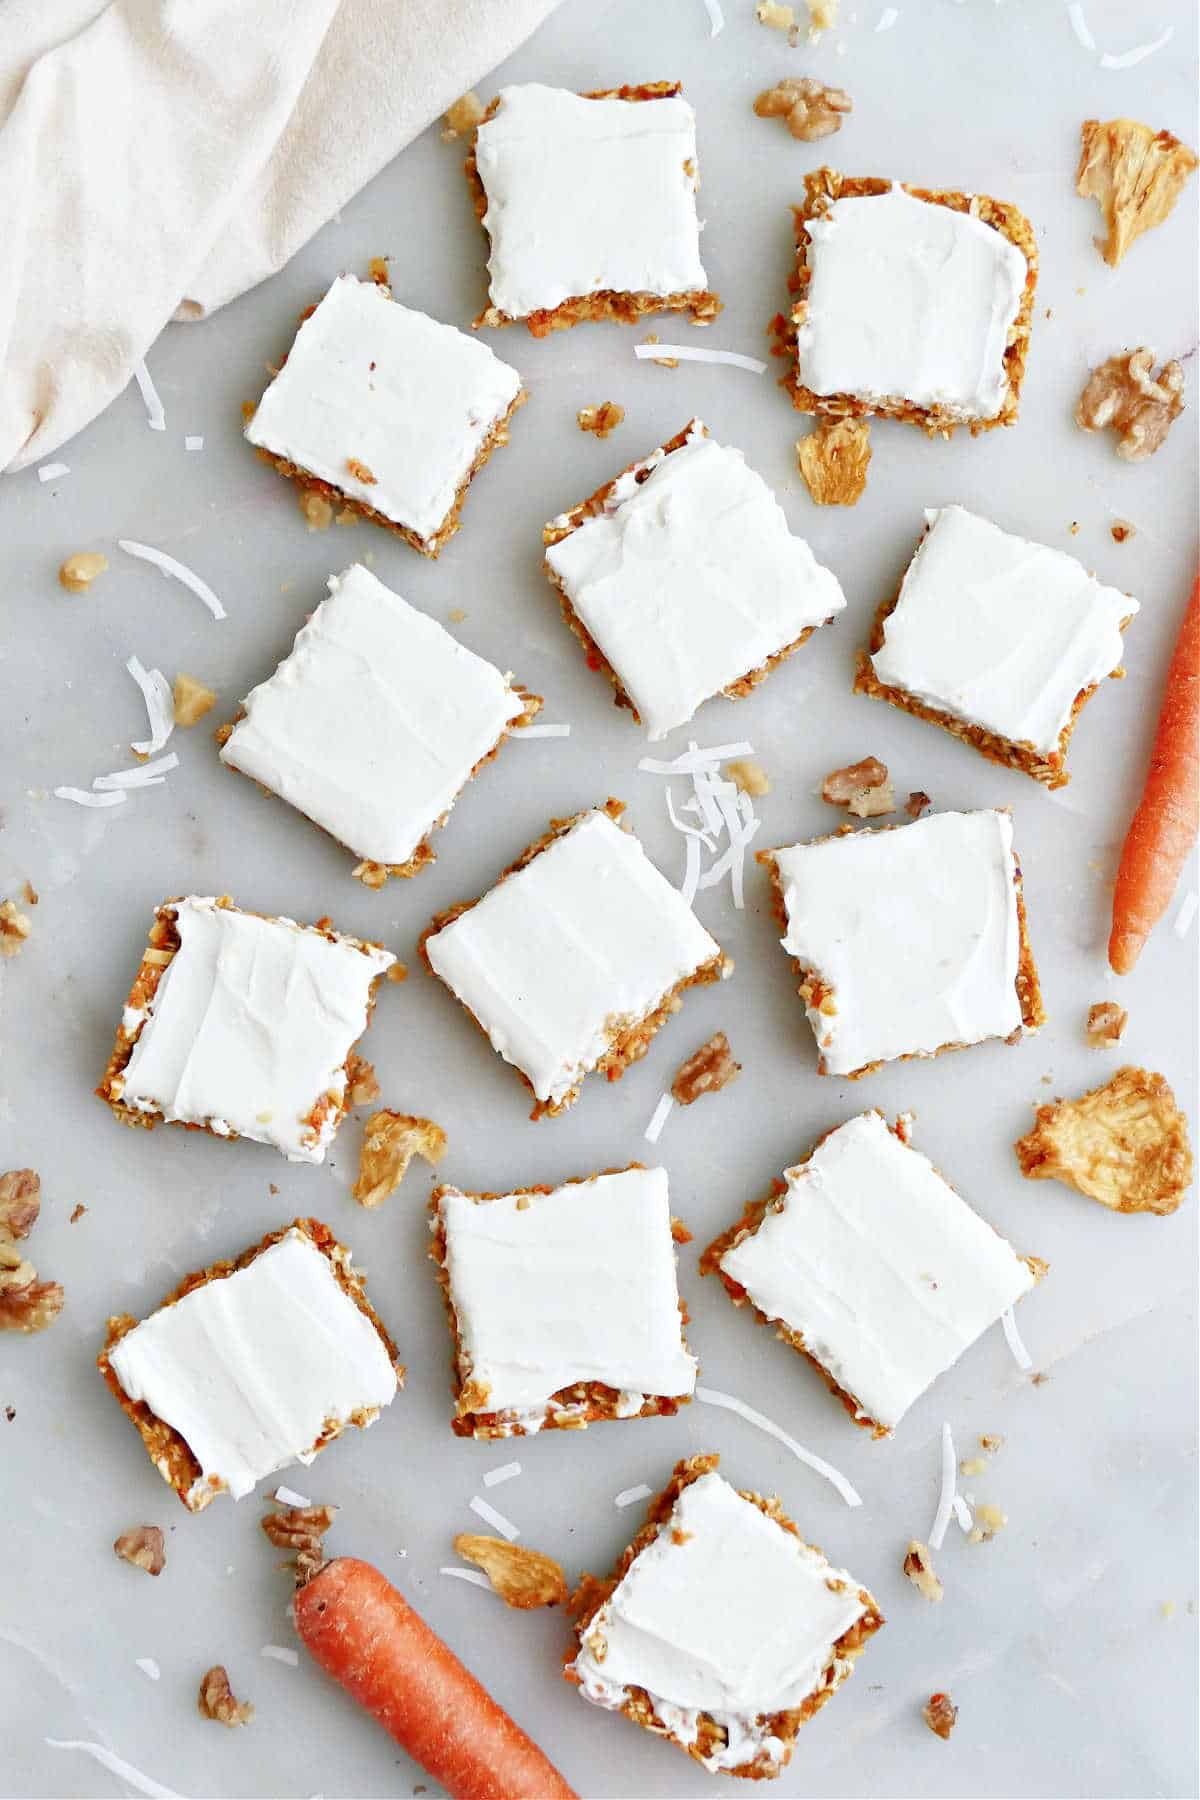 Several no bake carrot cake bars sliced into squares next to fresh whole carrots.